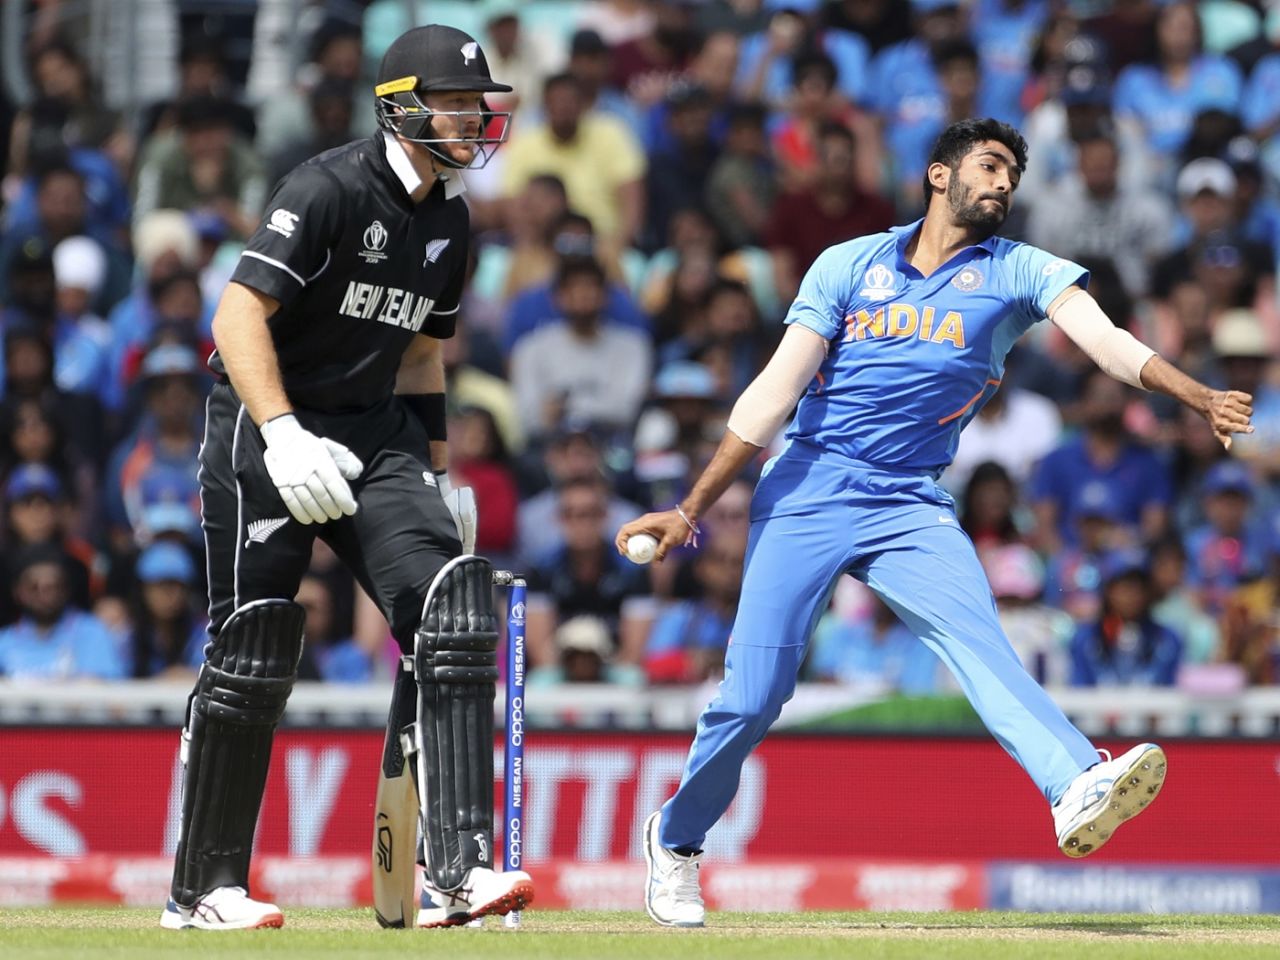 Jasprit Bumrah prepares to bowl to Kane Willaimson, World Cup 2019, warm-up, The Oval, May 25, 2019